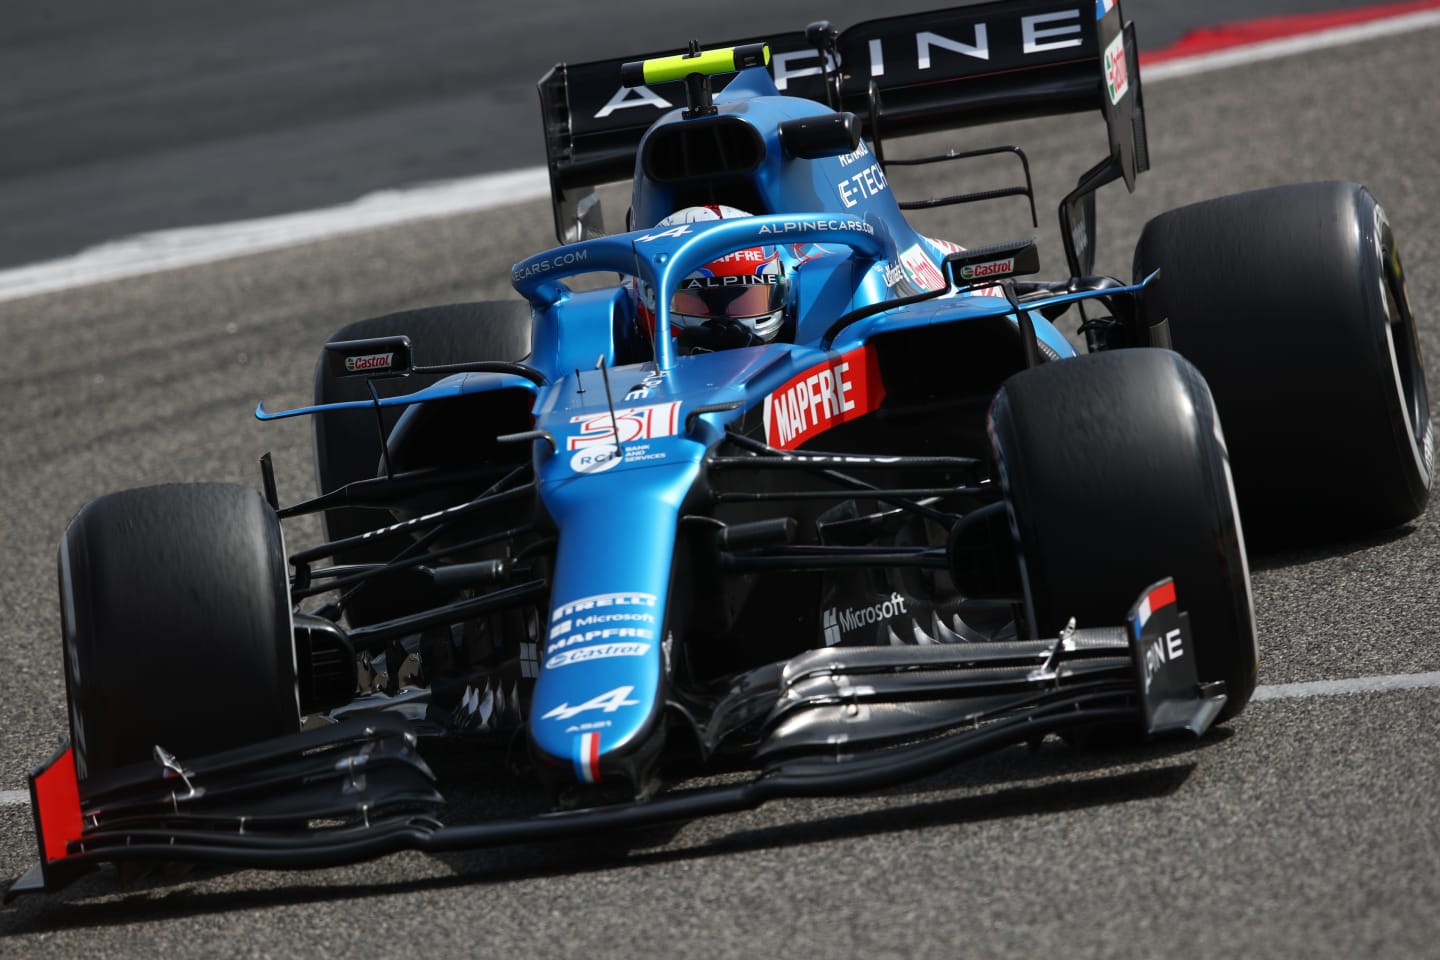 The resplendent blue of the Alpine A521 shines at Sakhir, with Esteban Ocon taking over on day 1